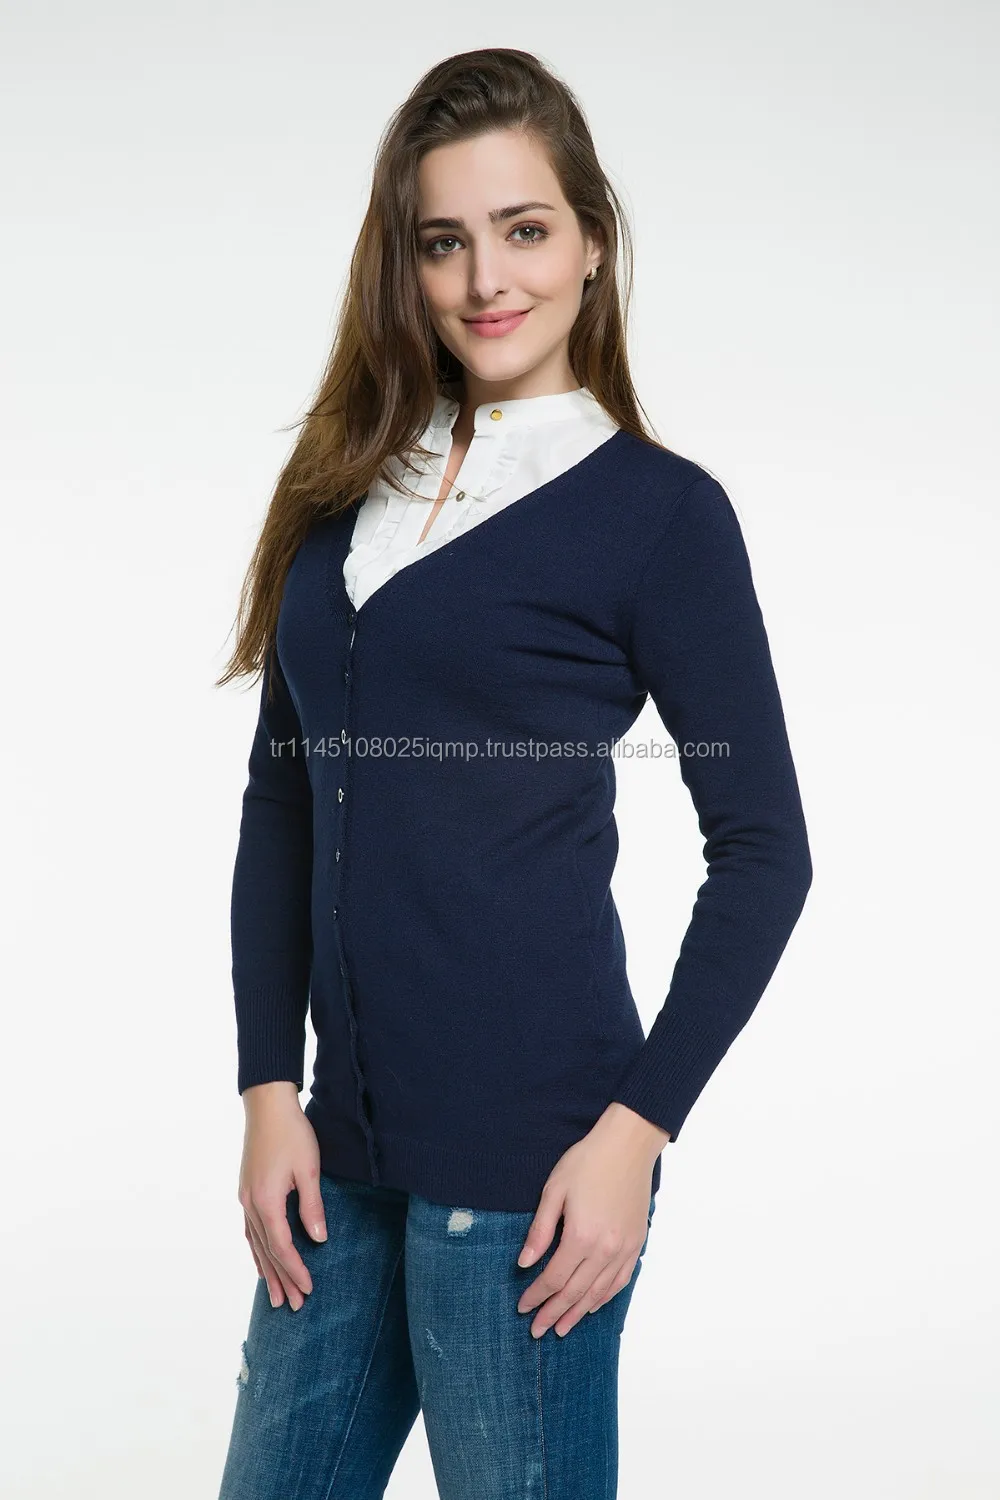 Wholesale cardigan sweaters for women cheap york